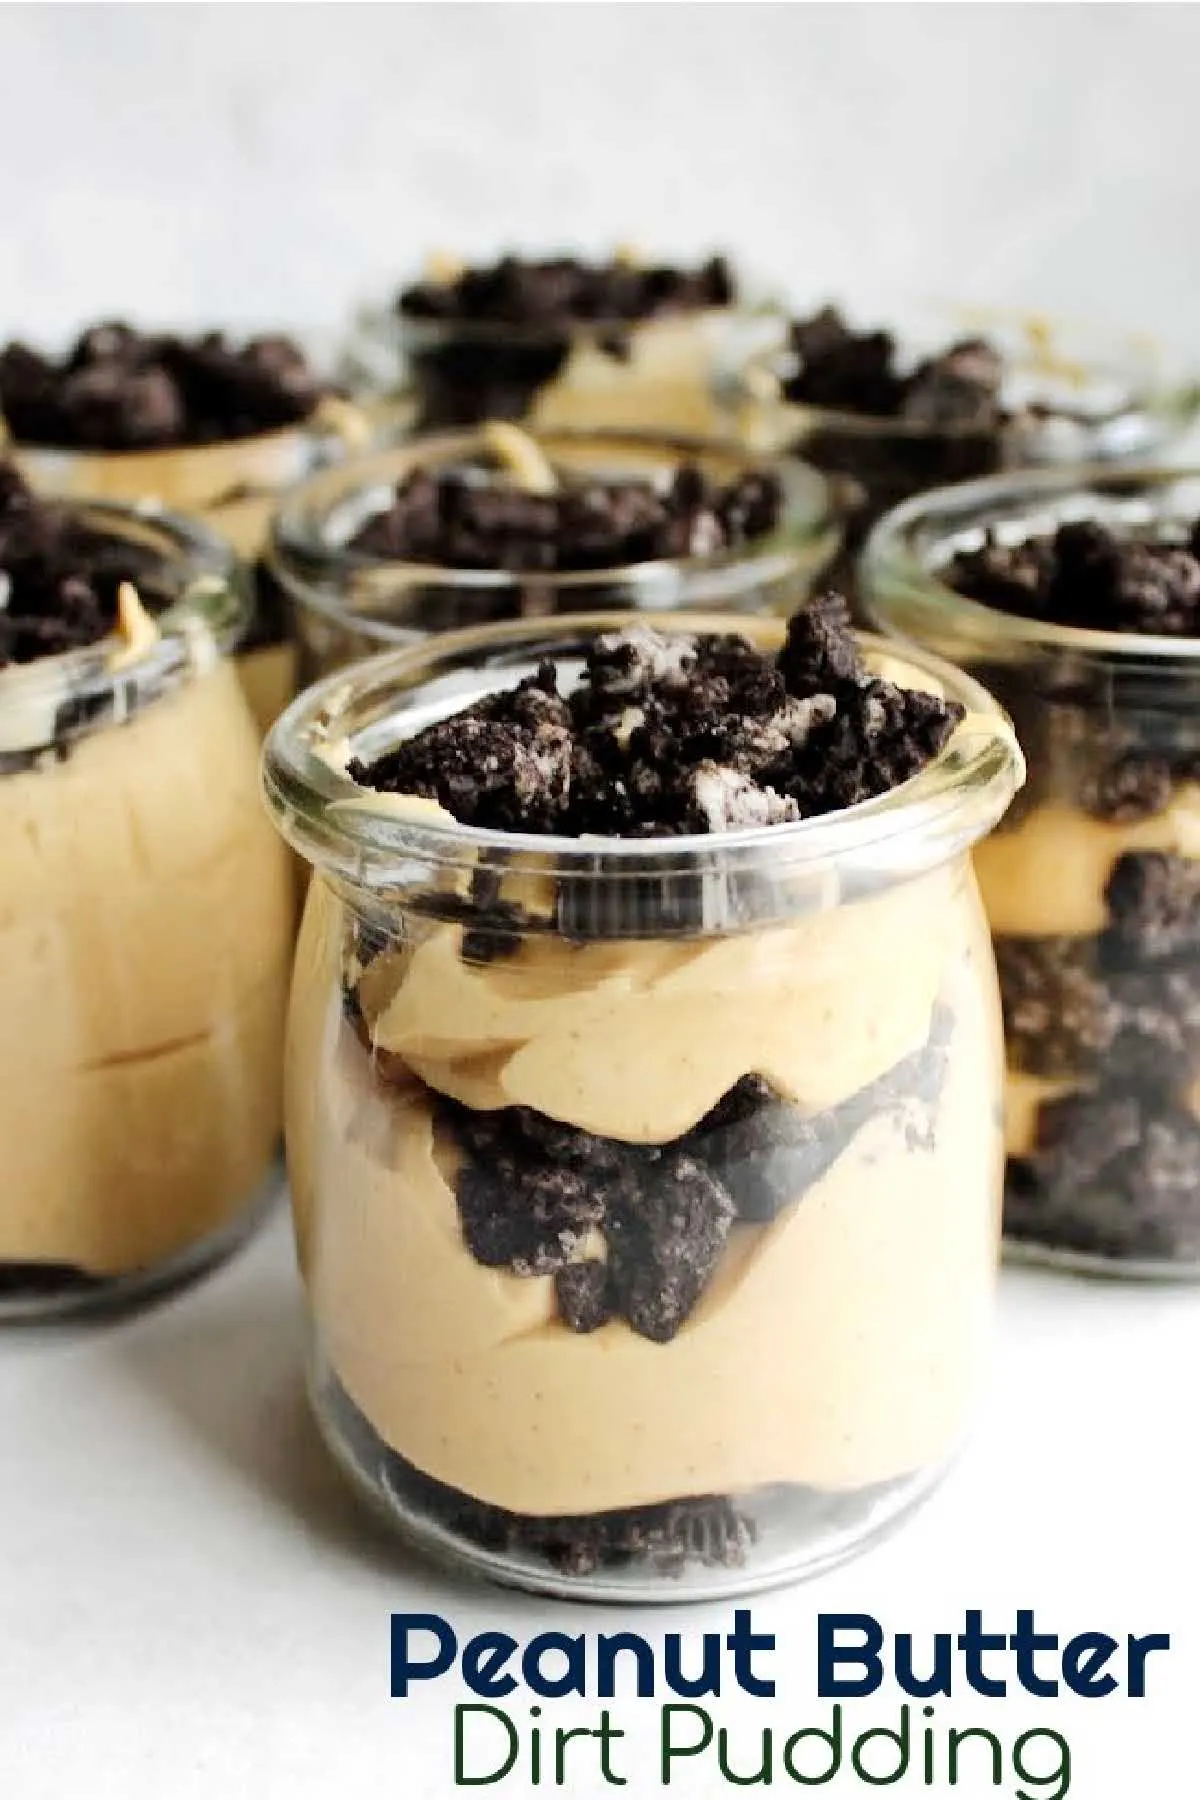 Layers of crushed Oreo cookies and creamy filling combine to make these tasty peanut butter dirt pudding jars. They are easy to make and tasty amazing!